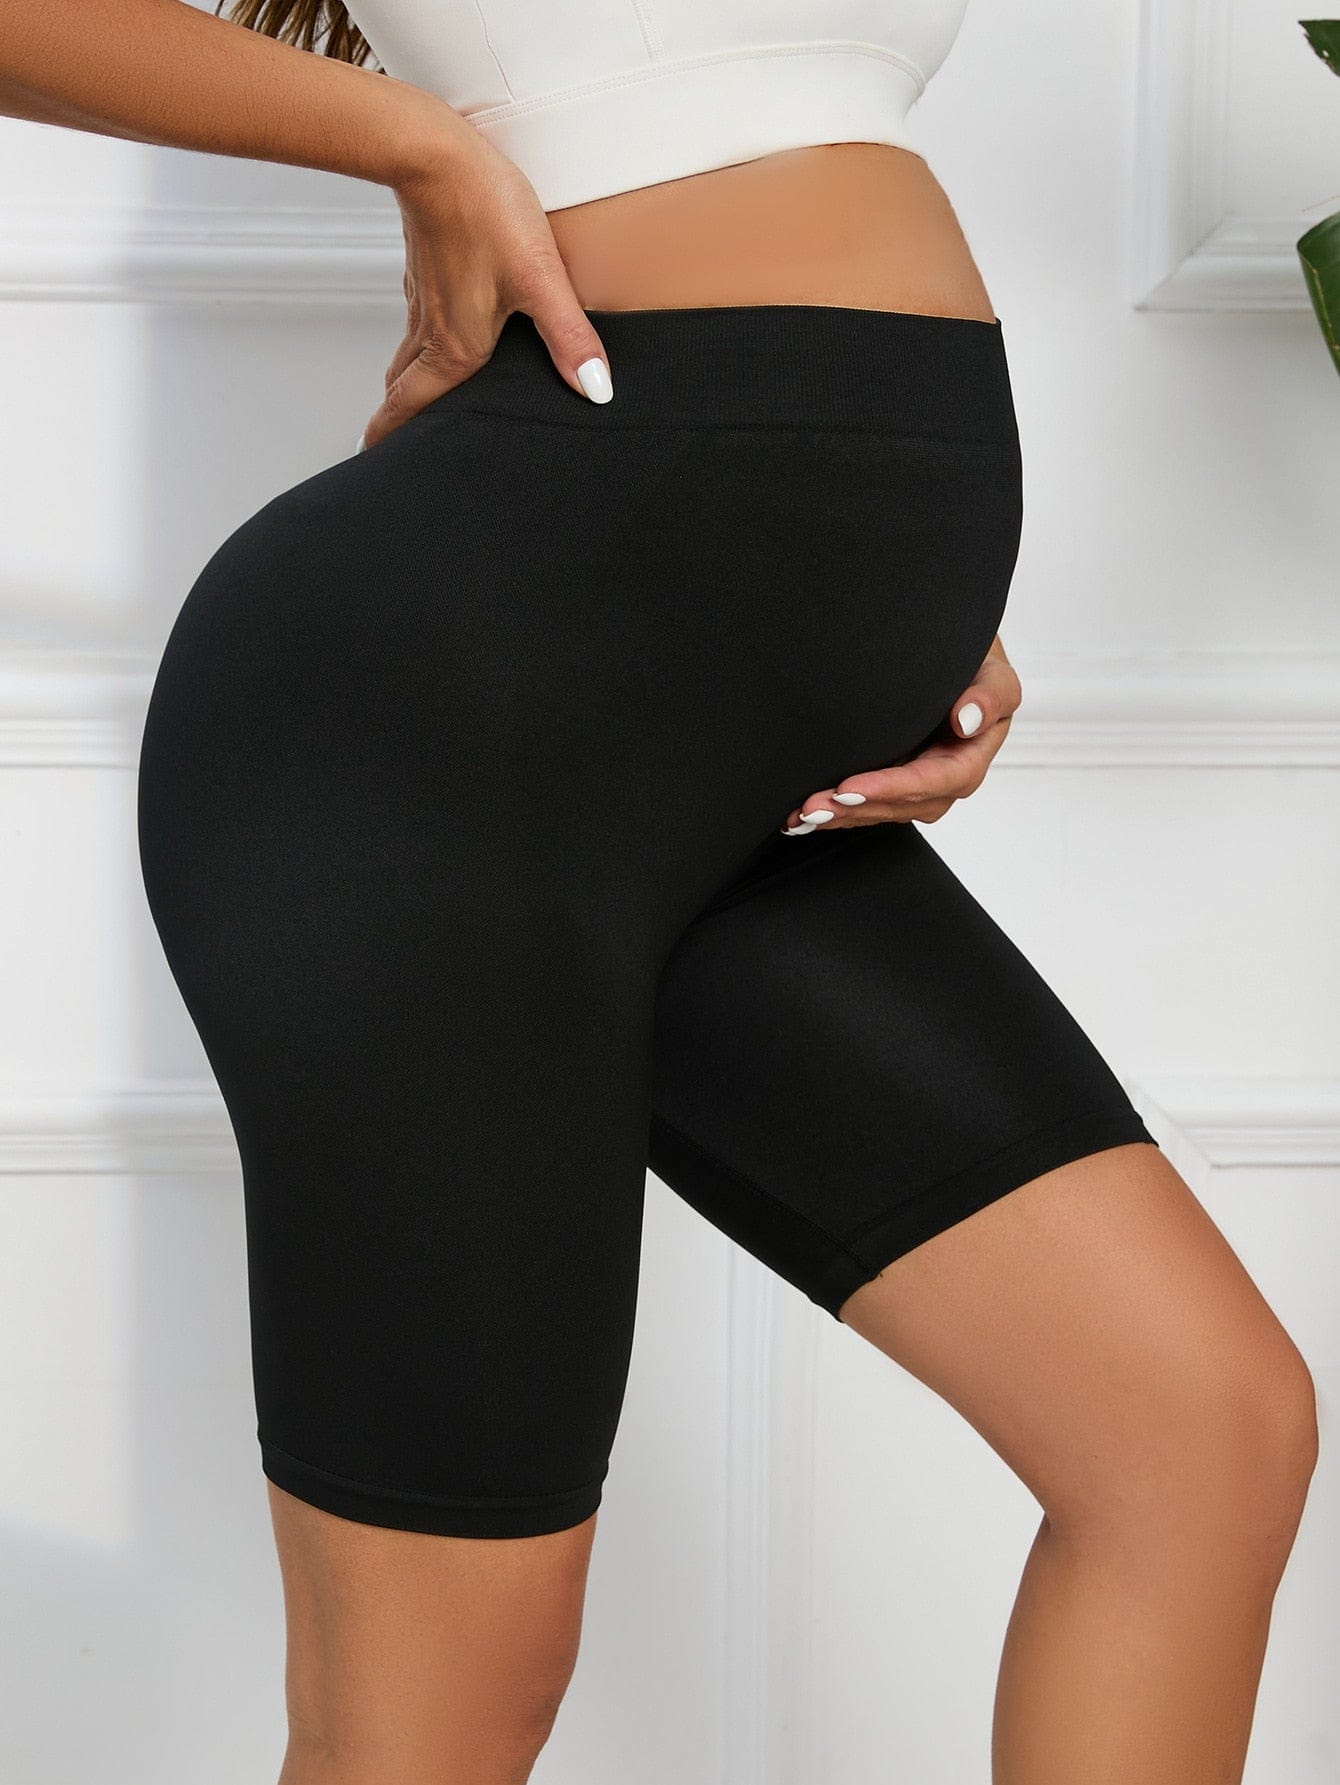 Maternity Yoga Shorts - Over The Belly Maternity Biker Shorts - Perfect for Your Workout